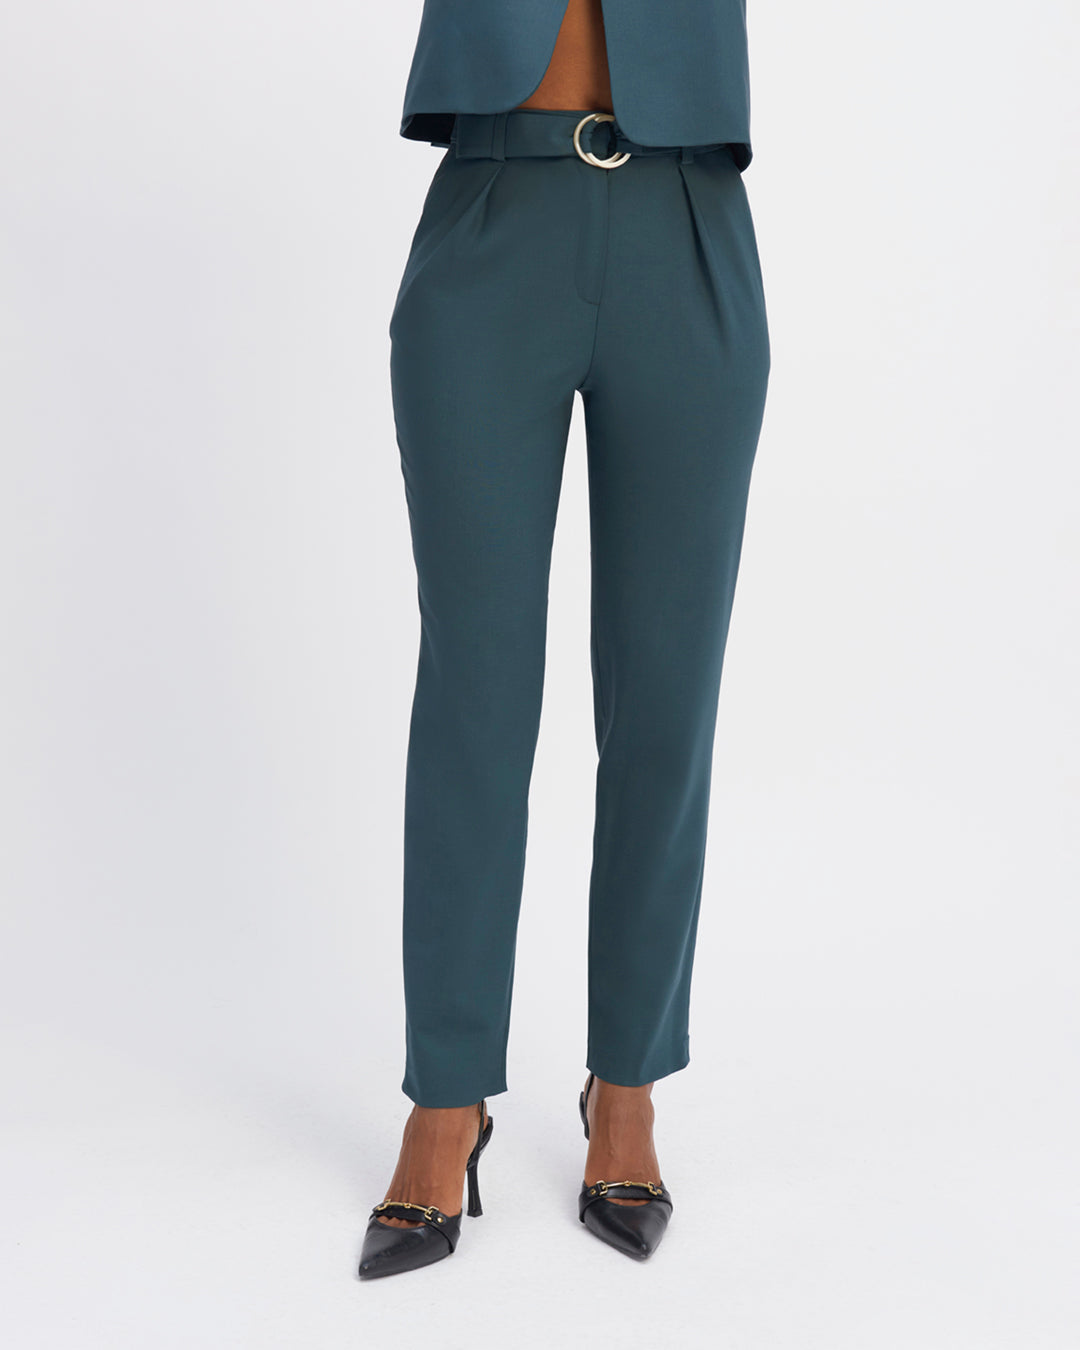 "Tailor-pants-superior-quality-Tailor-pants-green-Cut-7-8th-high-waist-Lined-under-the-belt-Two-pockets-Italian-style-Belt-assorted-tone-on-tone-Close-by-zip-and-staple-on-the-front-17H10-tailor-pants-for-women-paris-"